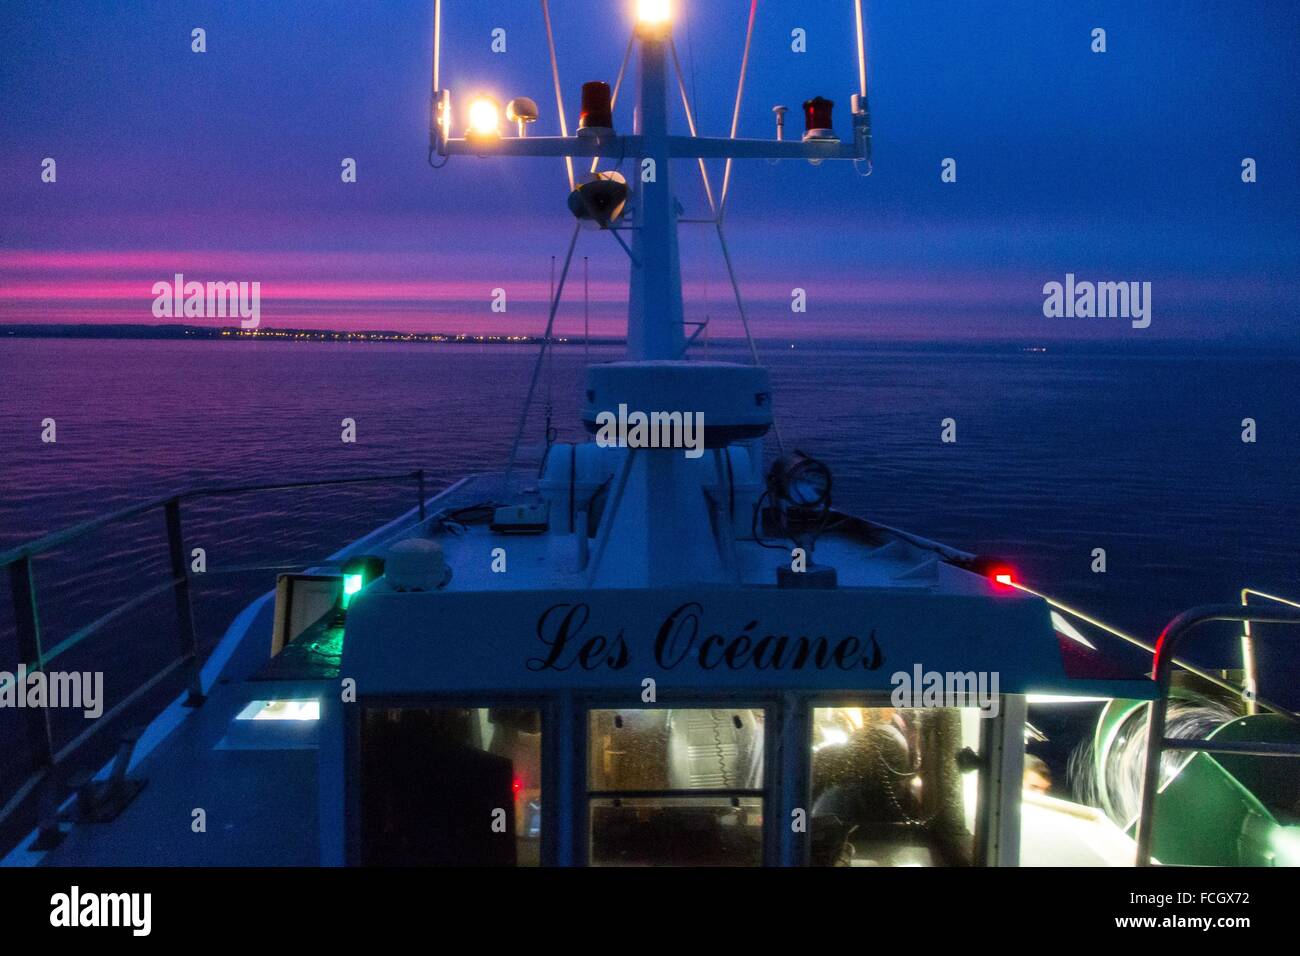 NAVIGATING IN THE DARK AT DAWN, SEA FISHING ON THE GILLNETTING BOAT 'LES OCEANES' OFF THE COAST OF LORIENT (56), BRITTANY, FRANC Stock Photo